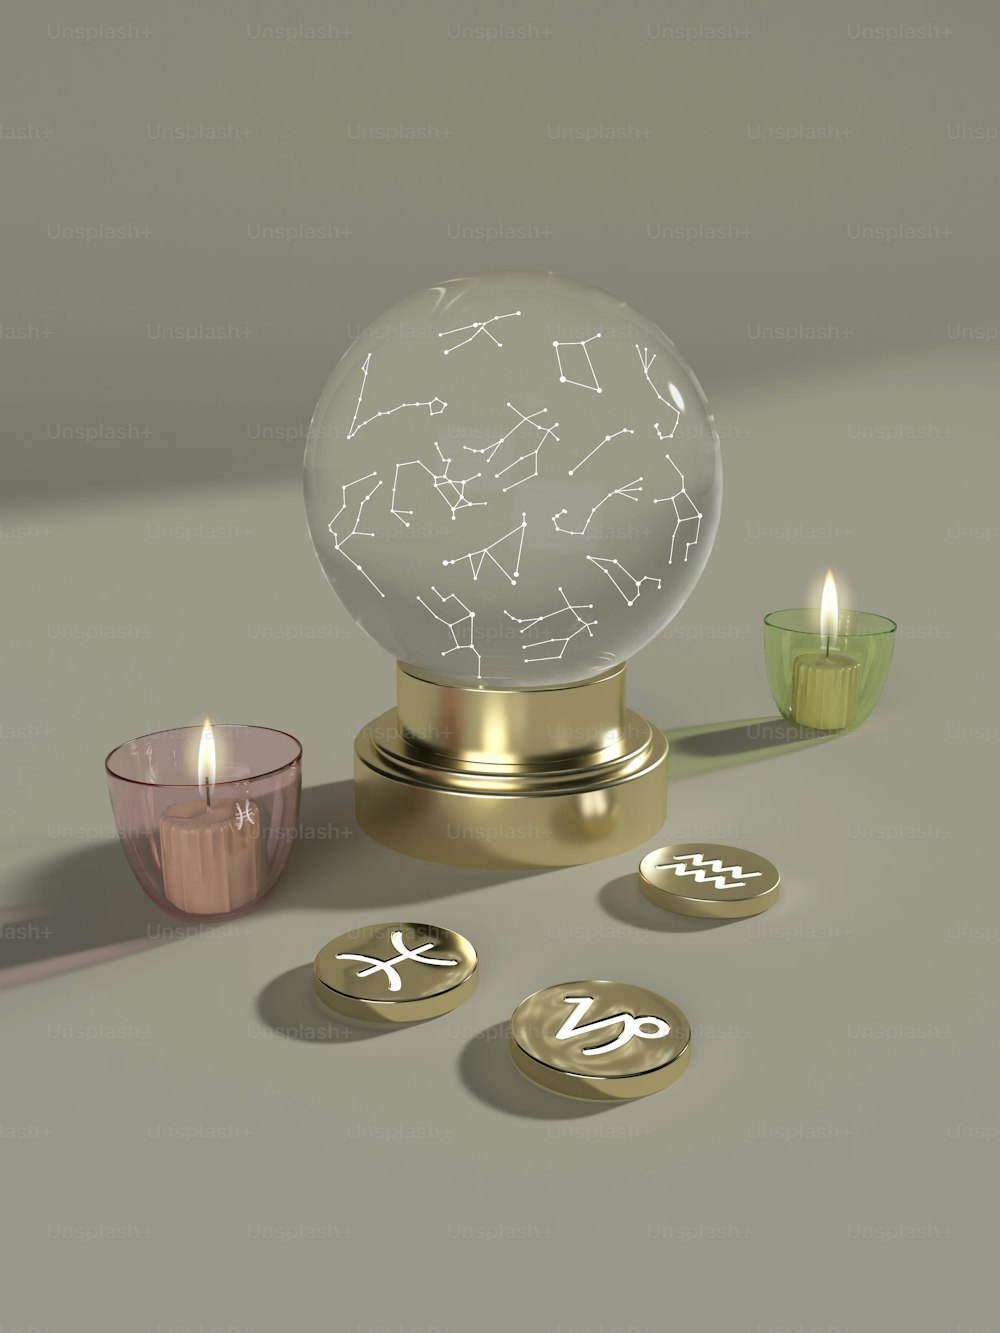 a crystal ball with a zodiac sign on it